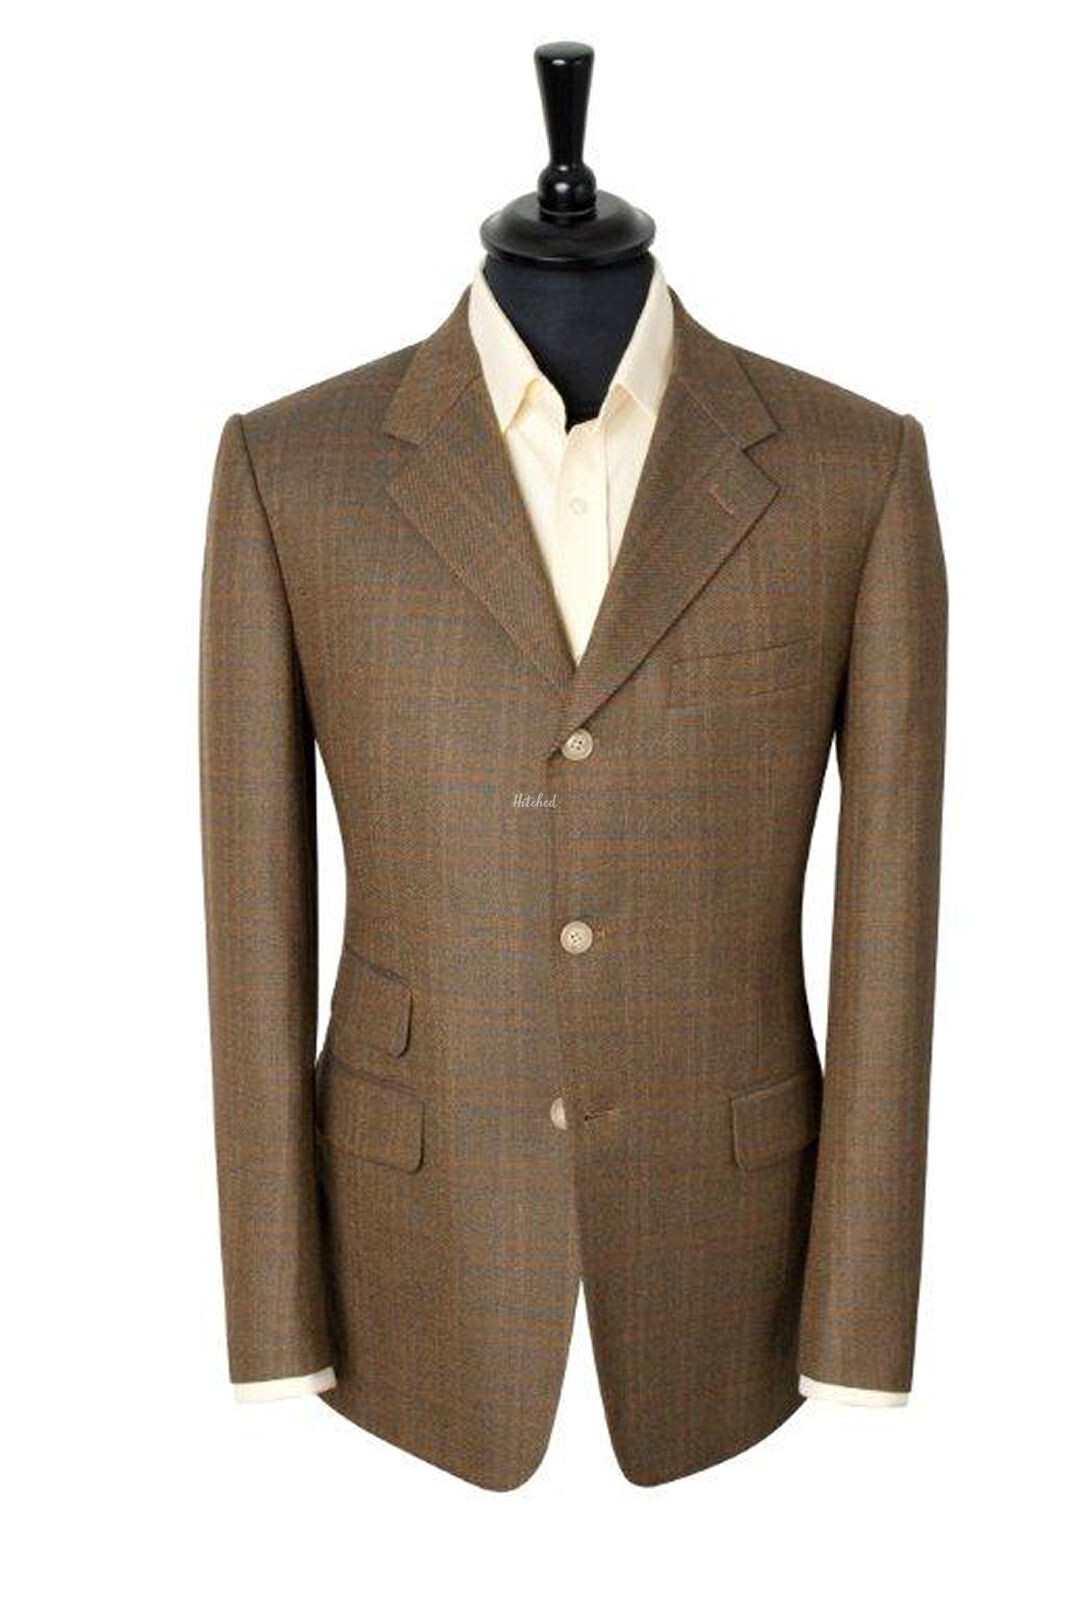 Tweed Jacket Mens Wedding Suit from King & Allen hitched